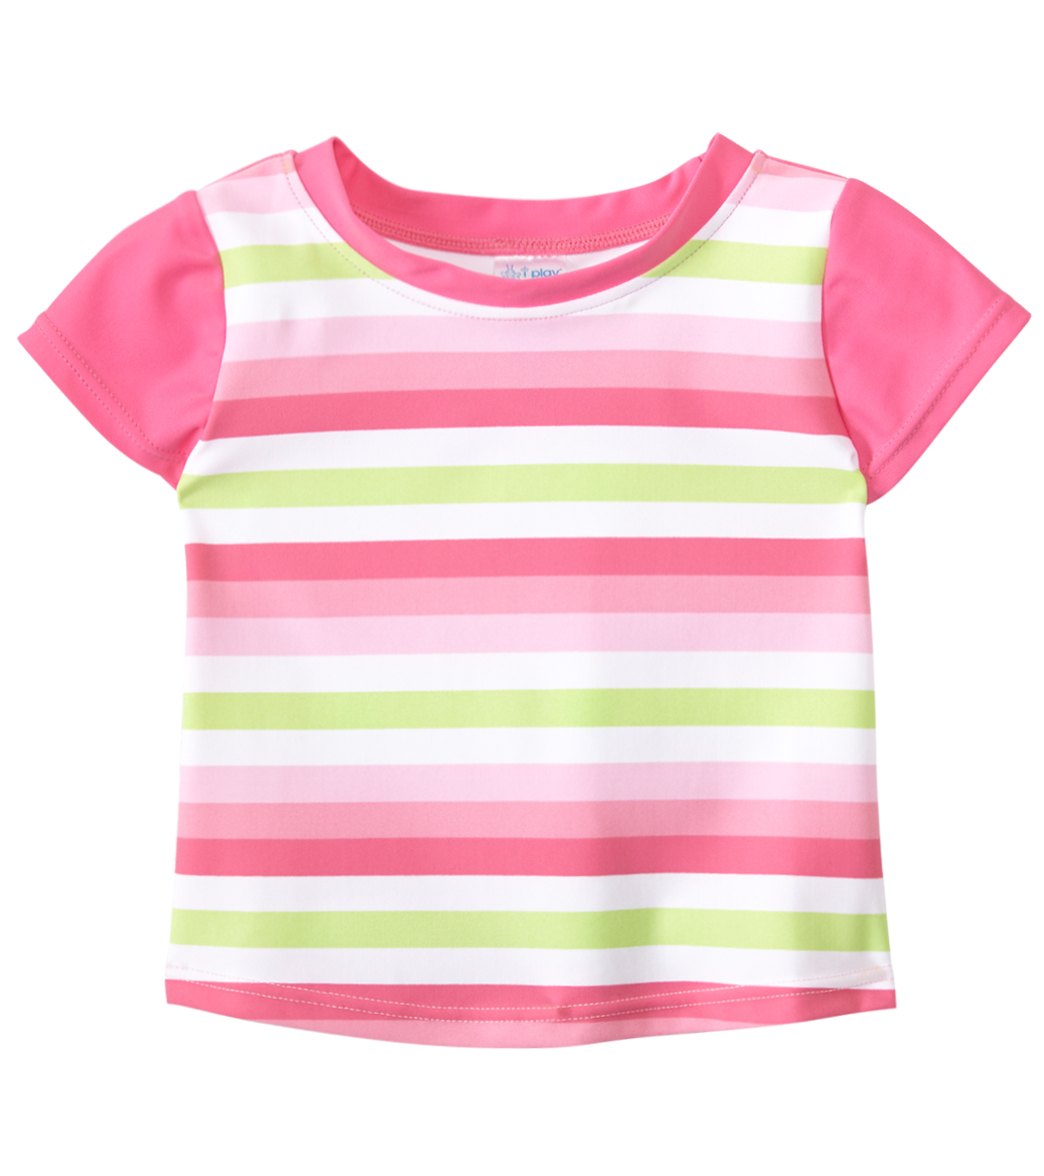 I Play. By Green Sprouts Girls' Classic Cap Sleeve Rashguard Baby - Pink Stripe 12 Months - Swimoutlet.com